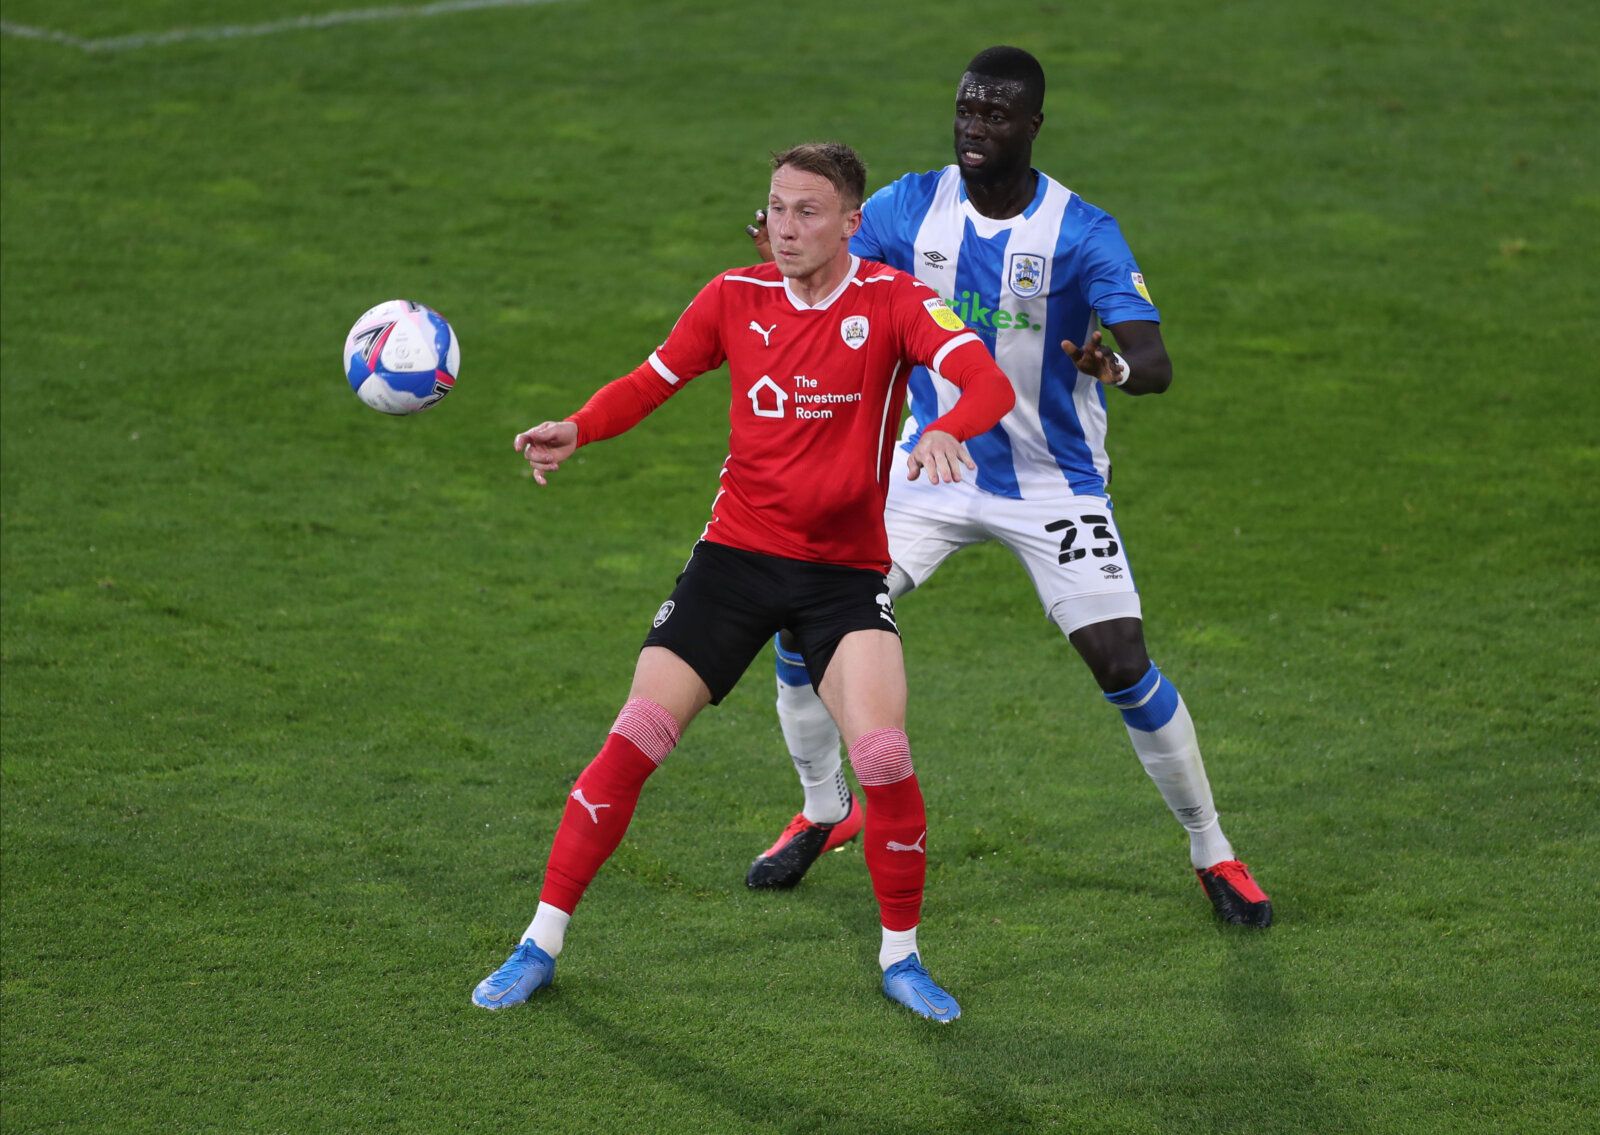 Soccer Football - Championship - Huddersfield Town v Barnsley - John Smith's Stadium, Huddersfield, Britain - April 21, 2021 Huddersfield Town's Nabby Sarr in action with Barnsley's Cauley Woodrow Action Images/Lee Smith EDITORIAL USE ONLY. No use with unauthorized audio, video, data, fixture lists, club/league logos or 'live' services. Online in-match use limited to 75 images, no video emulation. No use in betting, games or single club /league/player publications.  Please contact your account r